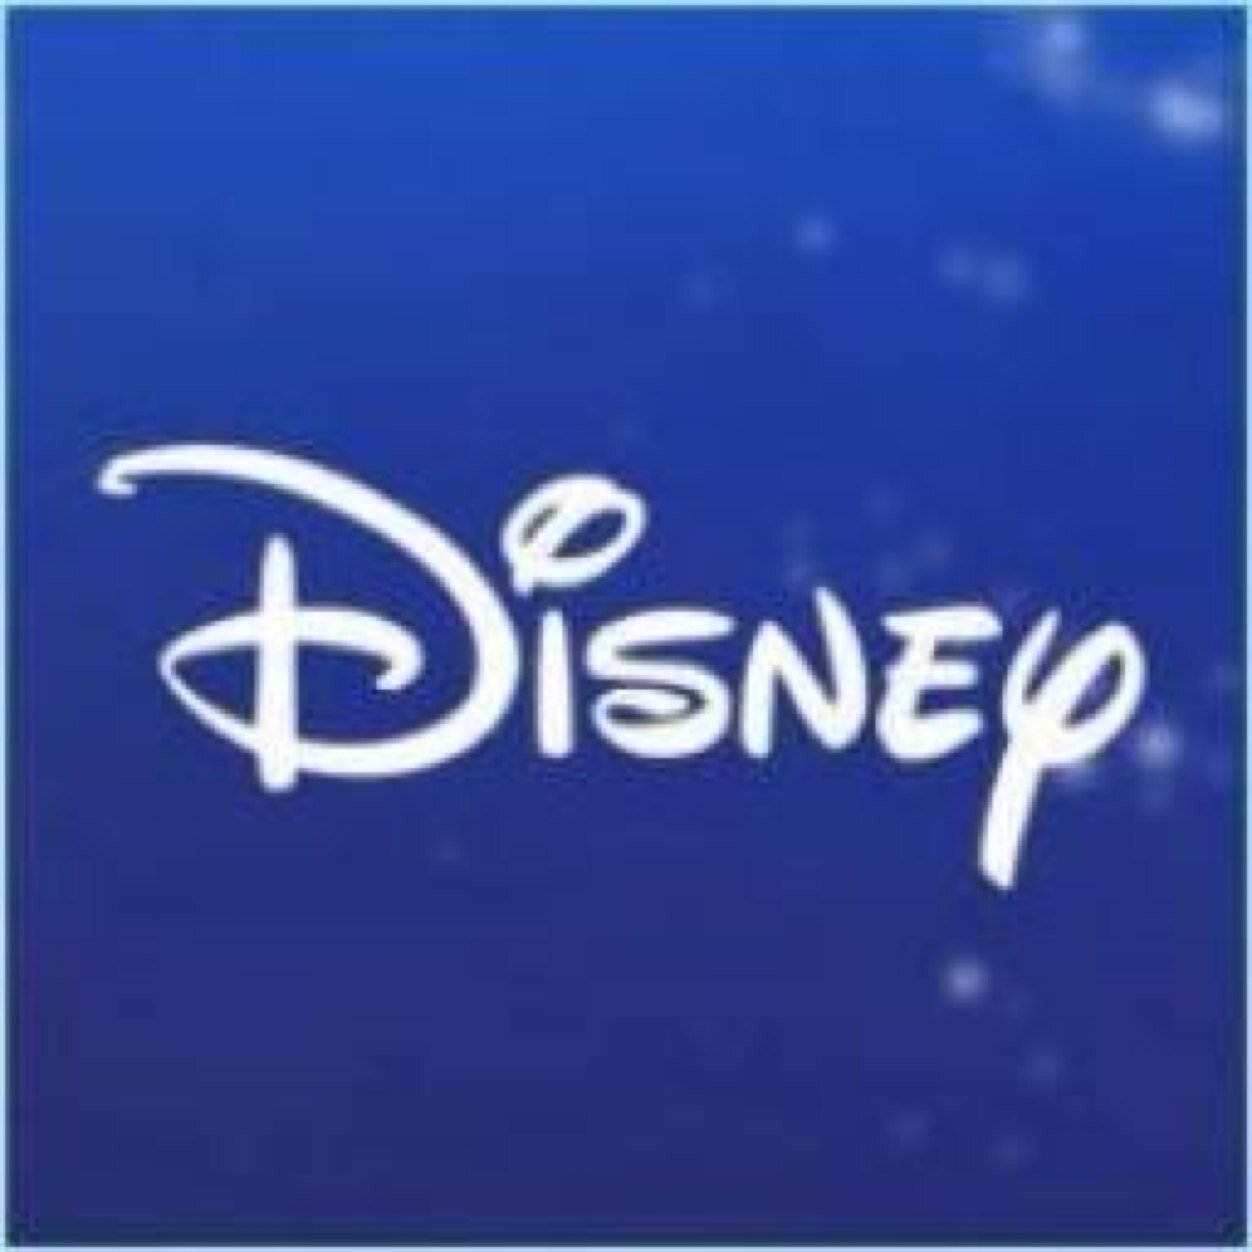 Tweeting actual movies coming out! Not affiliated with Disney